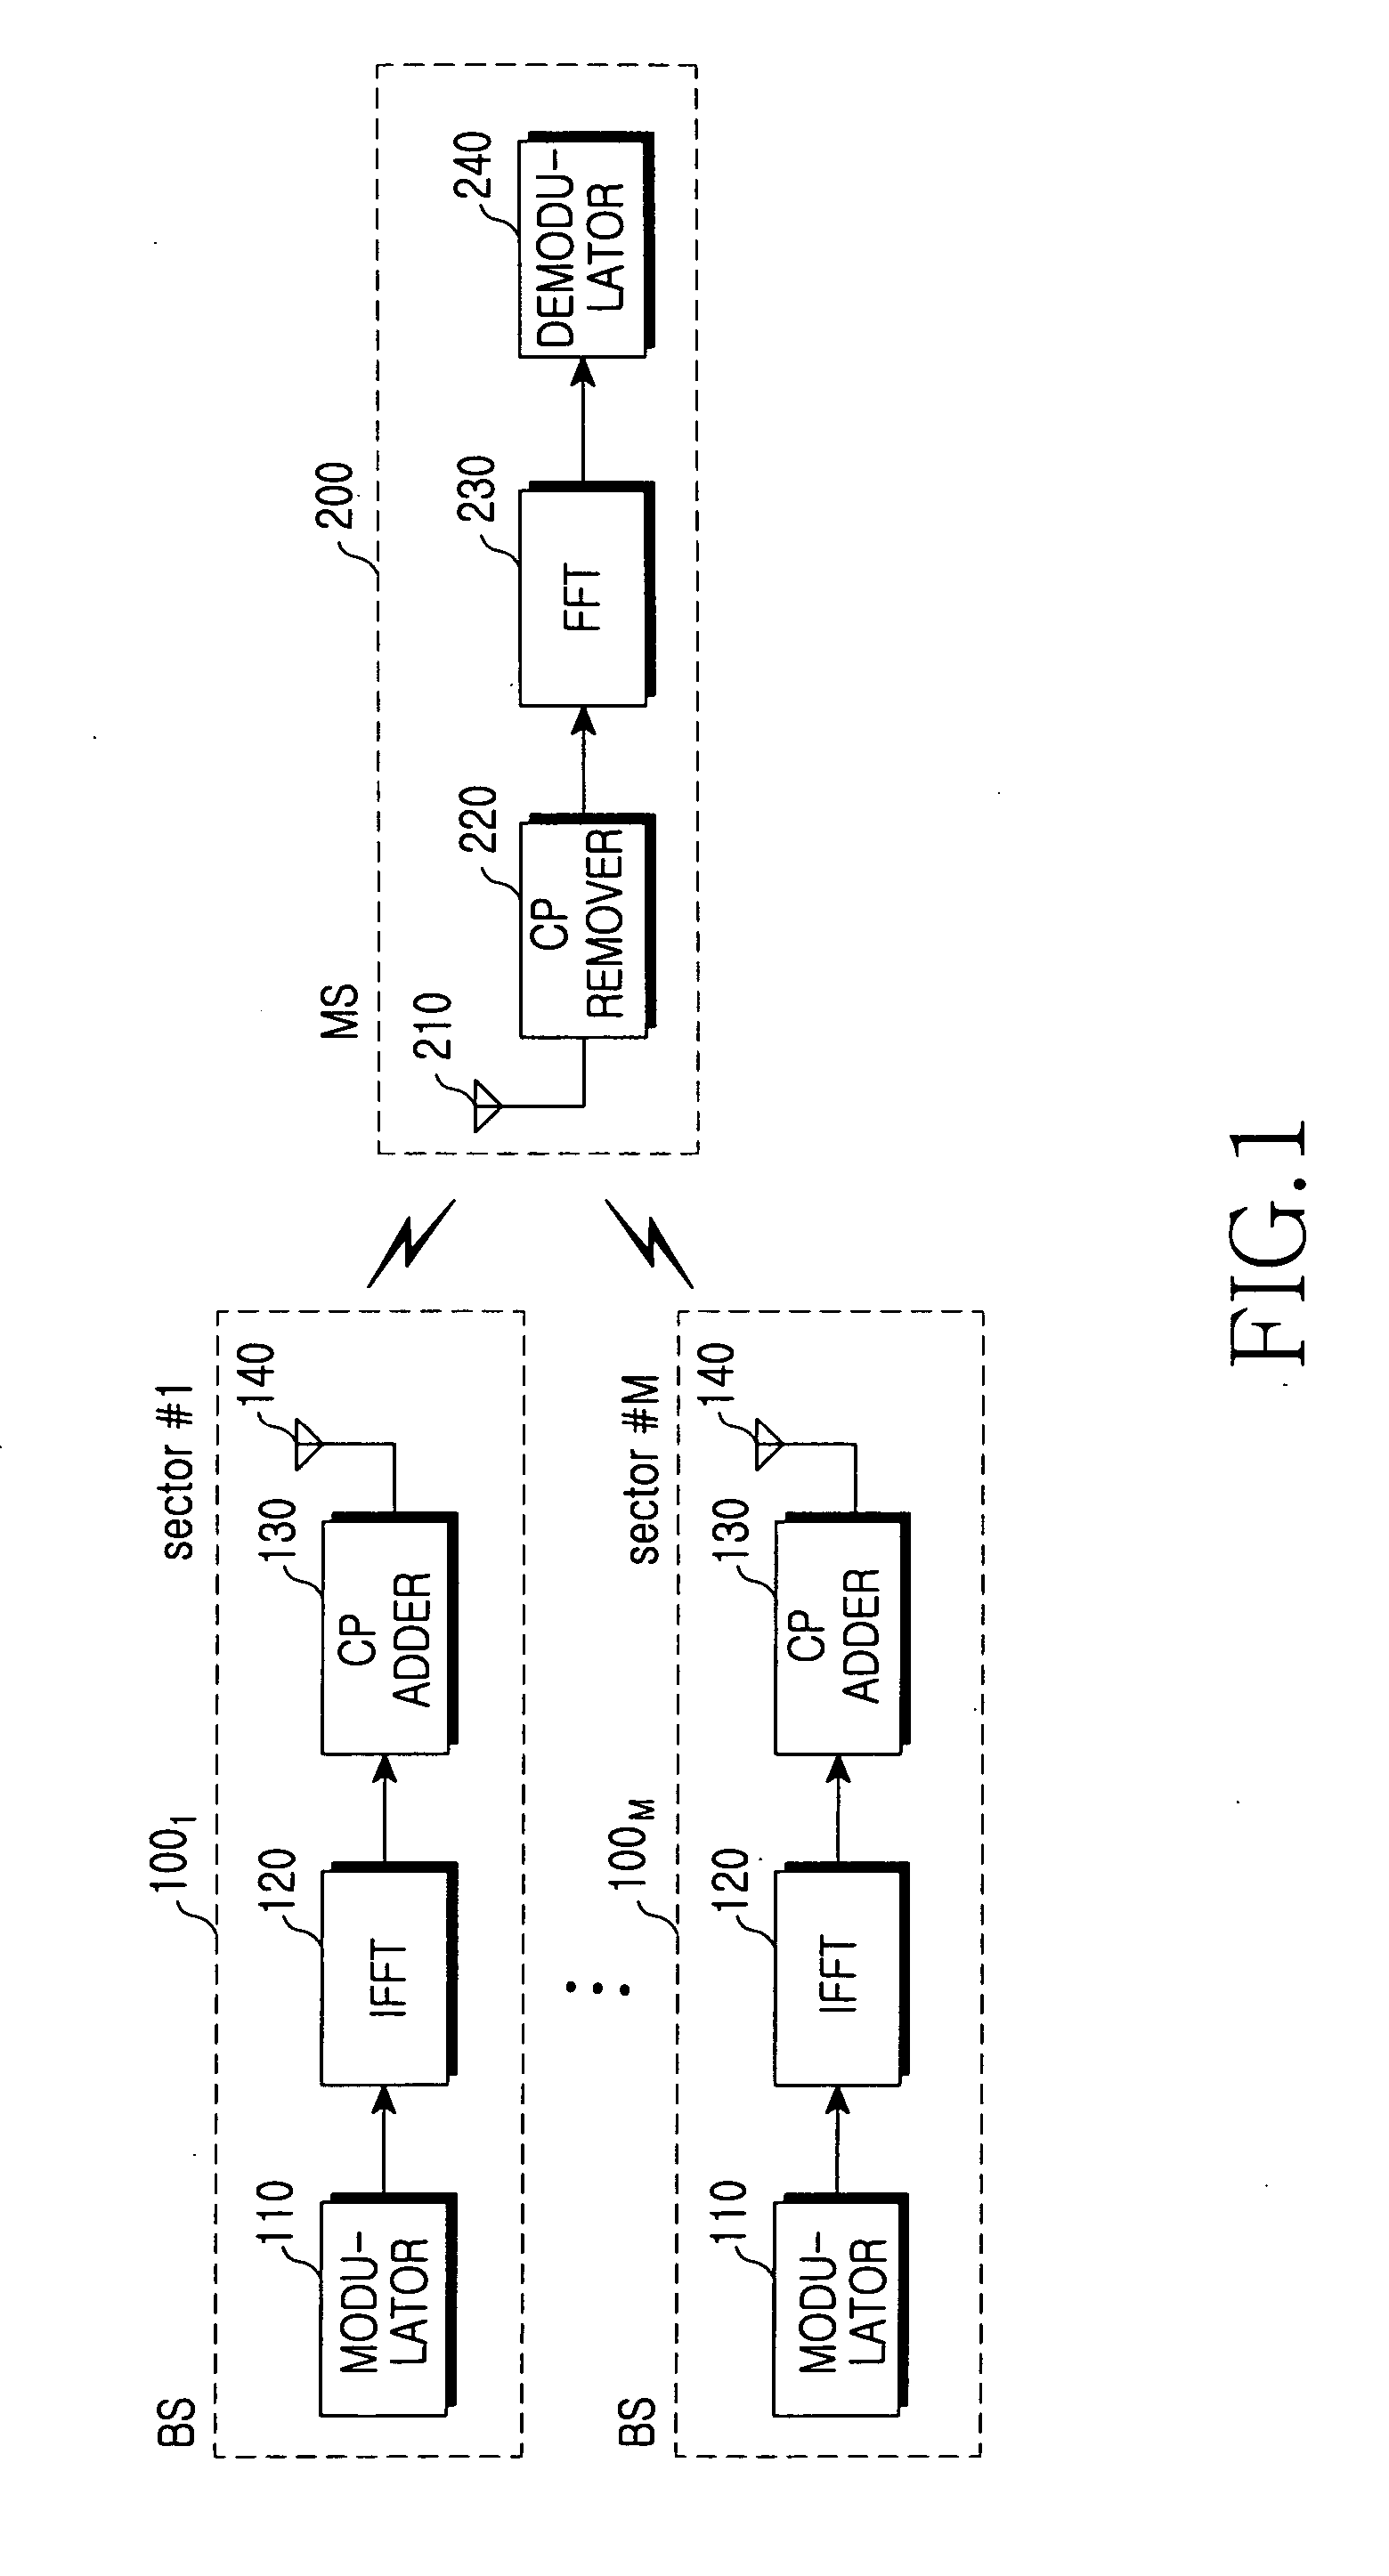 OFDM symbol transmission method and apparatus for providing sector diversity in a mobile communication system, and system using the same